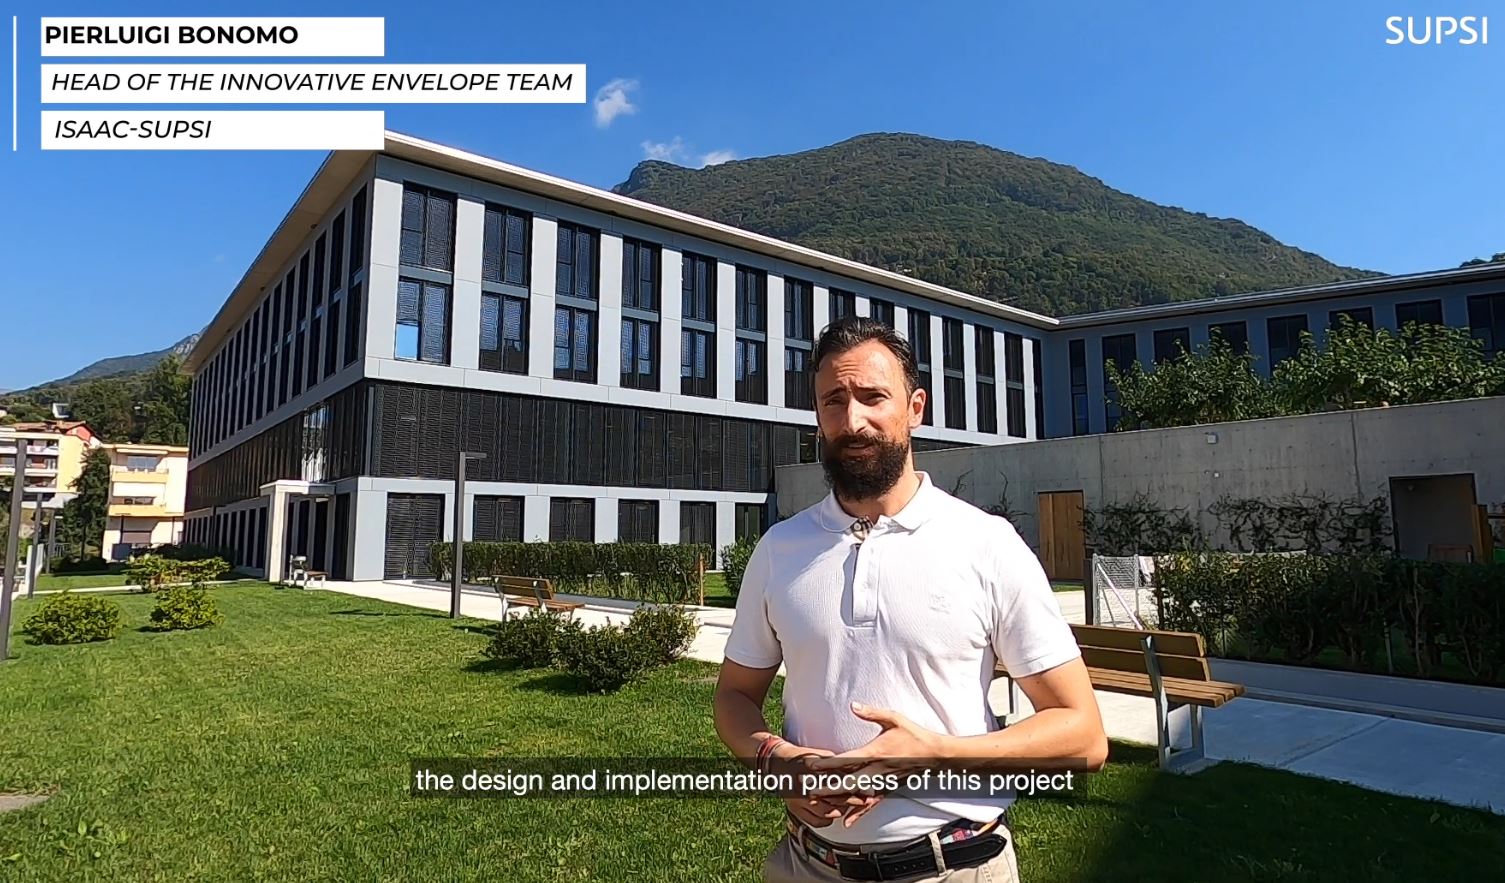 The largest BIPV facade in Ticino – interviews round 1/2